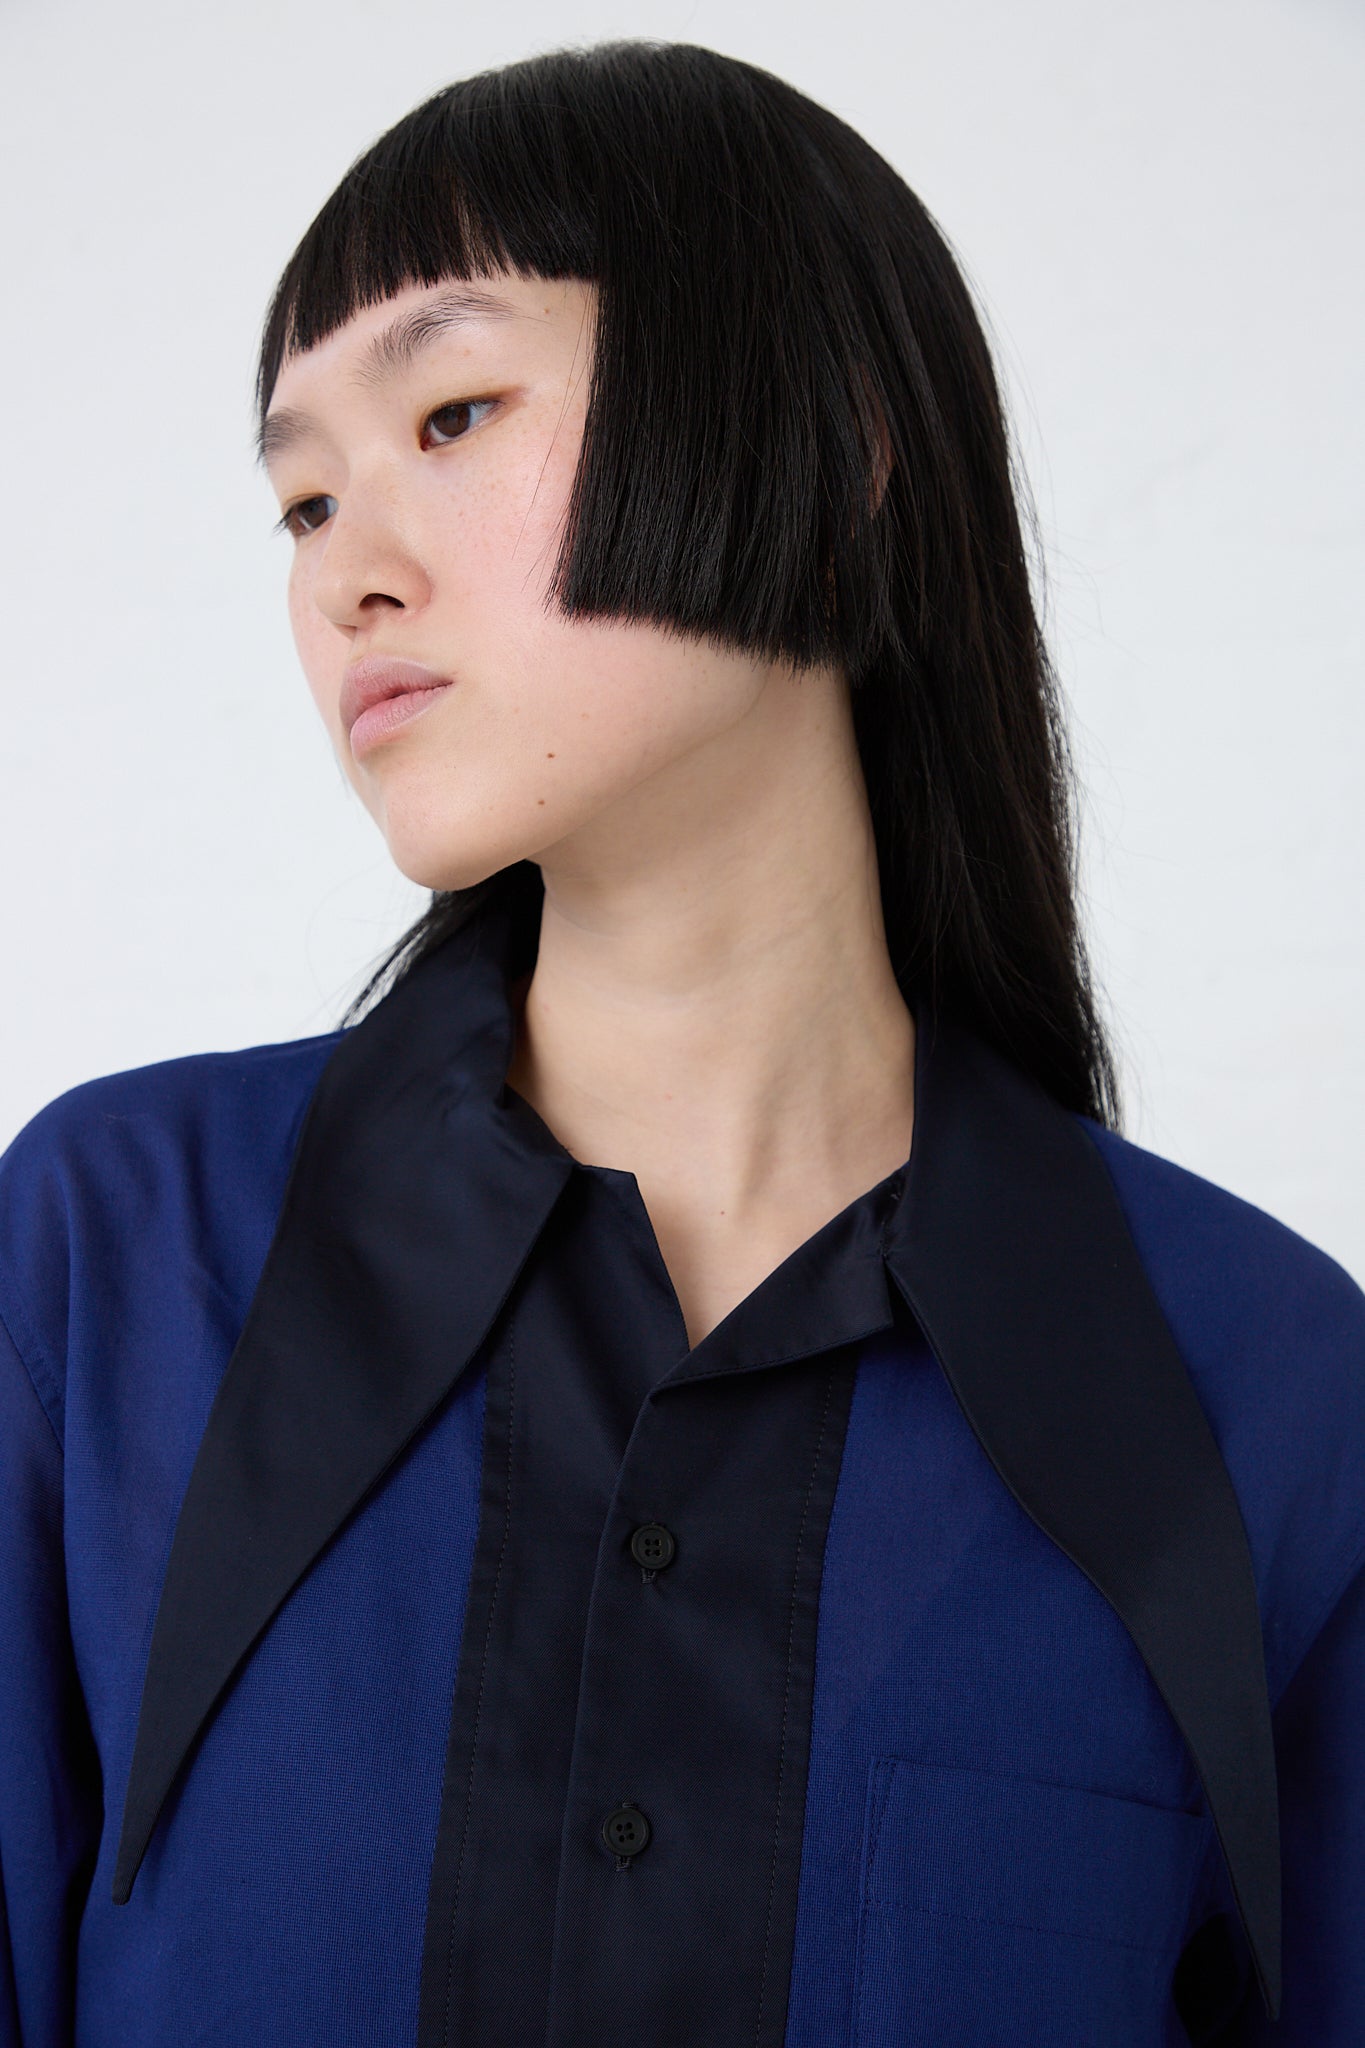 A woman in a TOGA PULLA Mesh Lace Shirt in Blue with black hair.